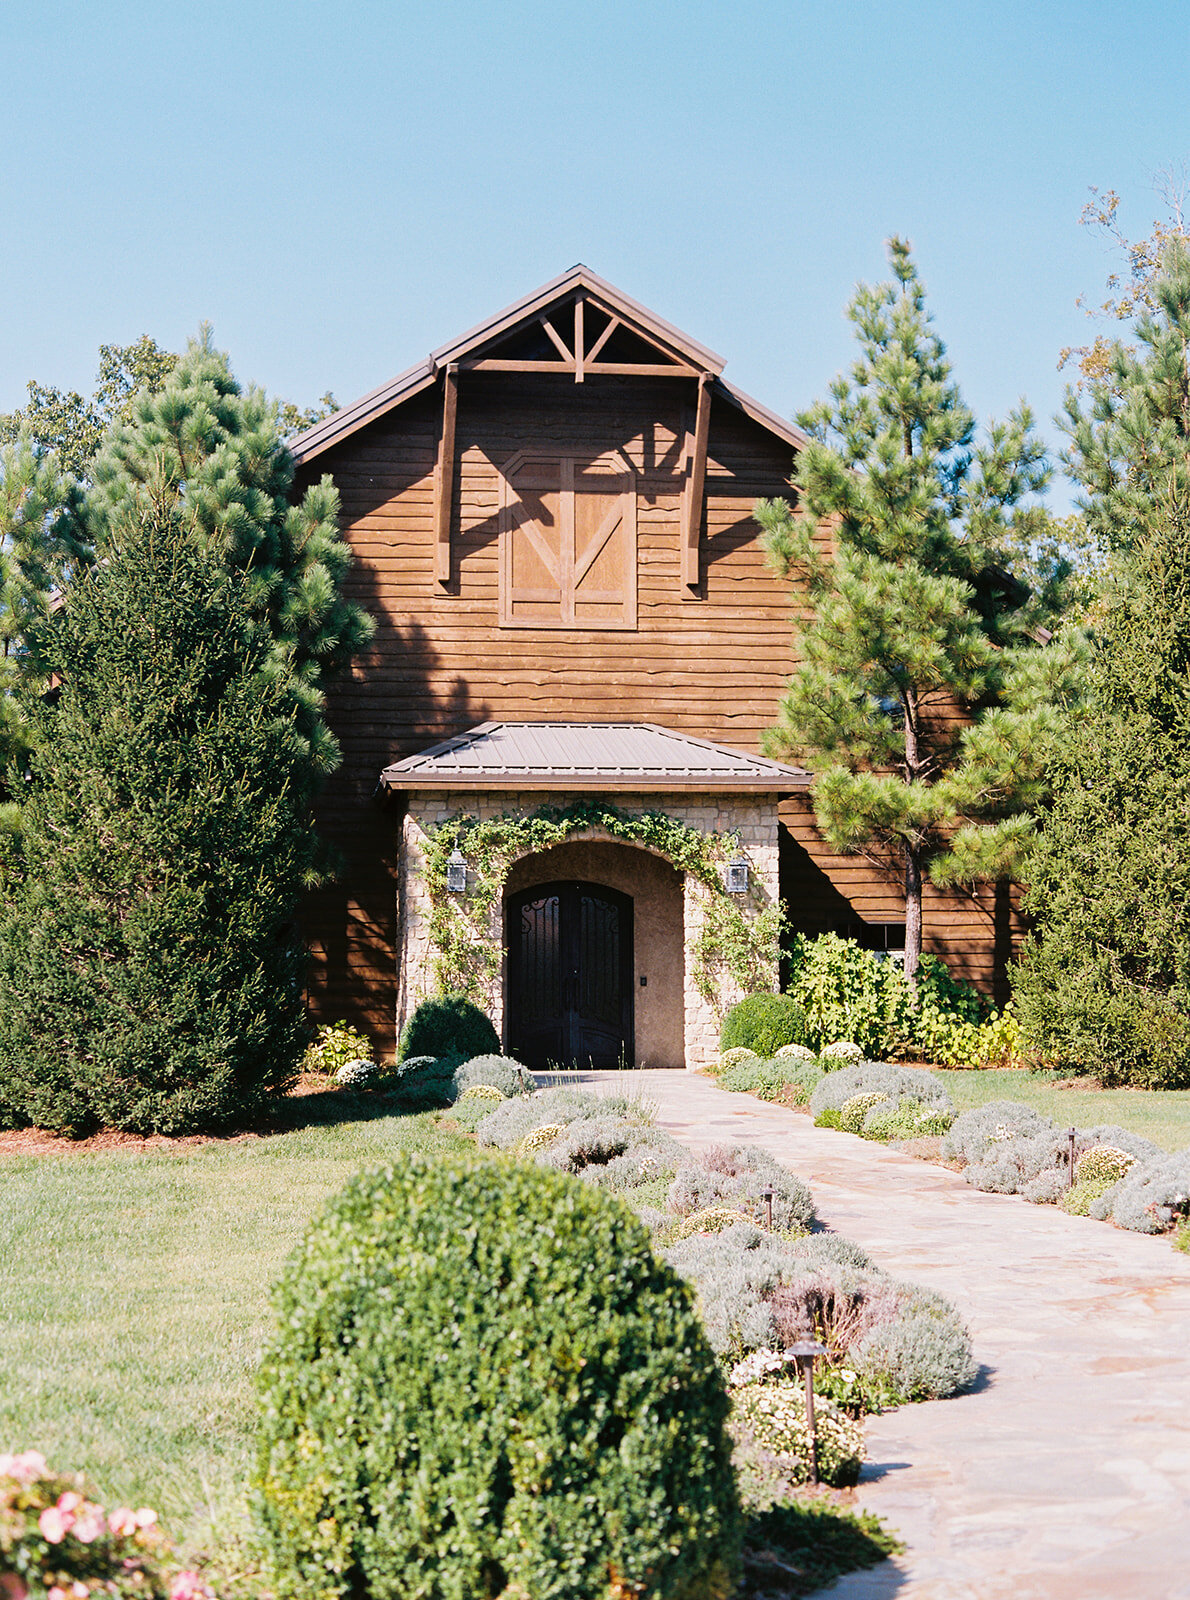 wedding venue with wood and stone accents